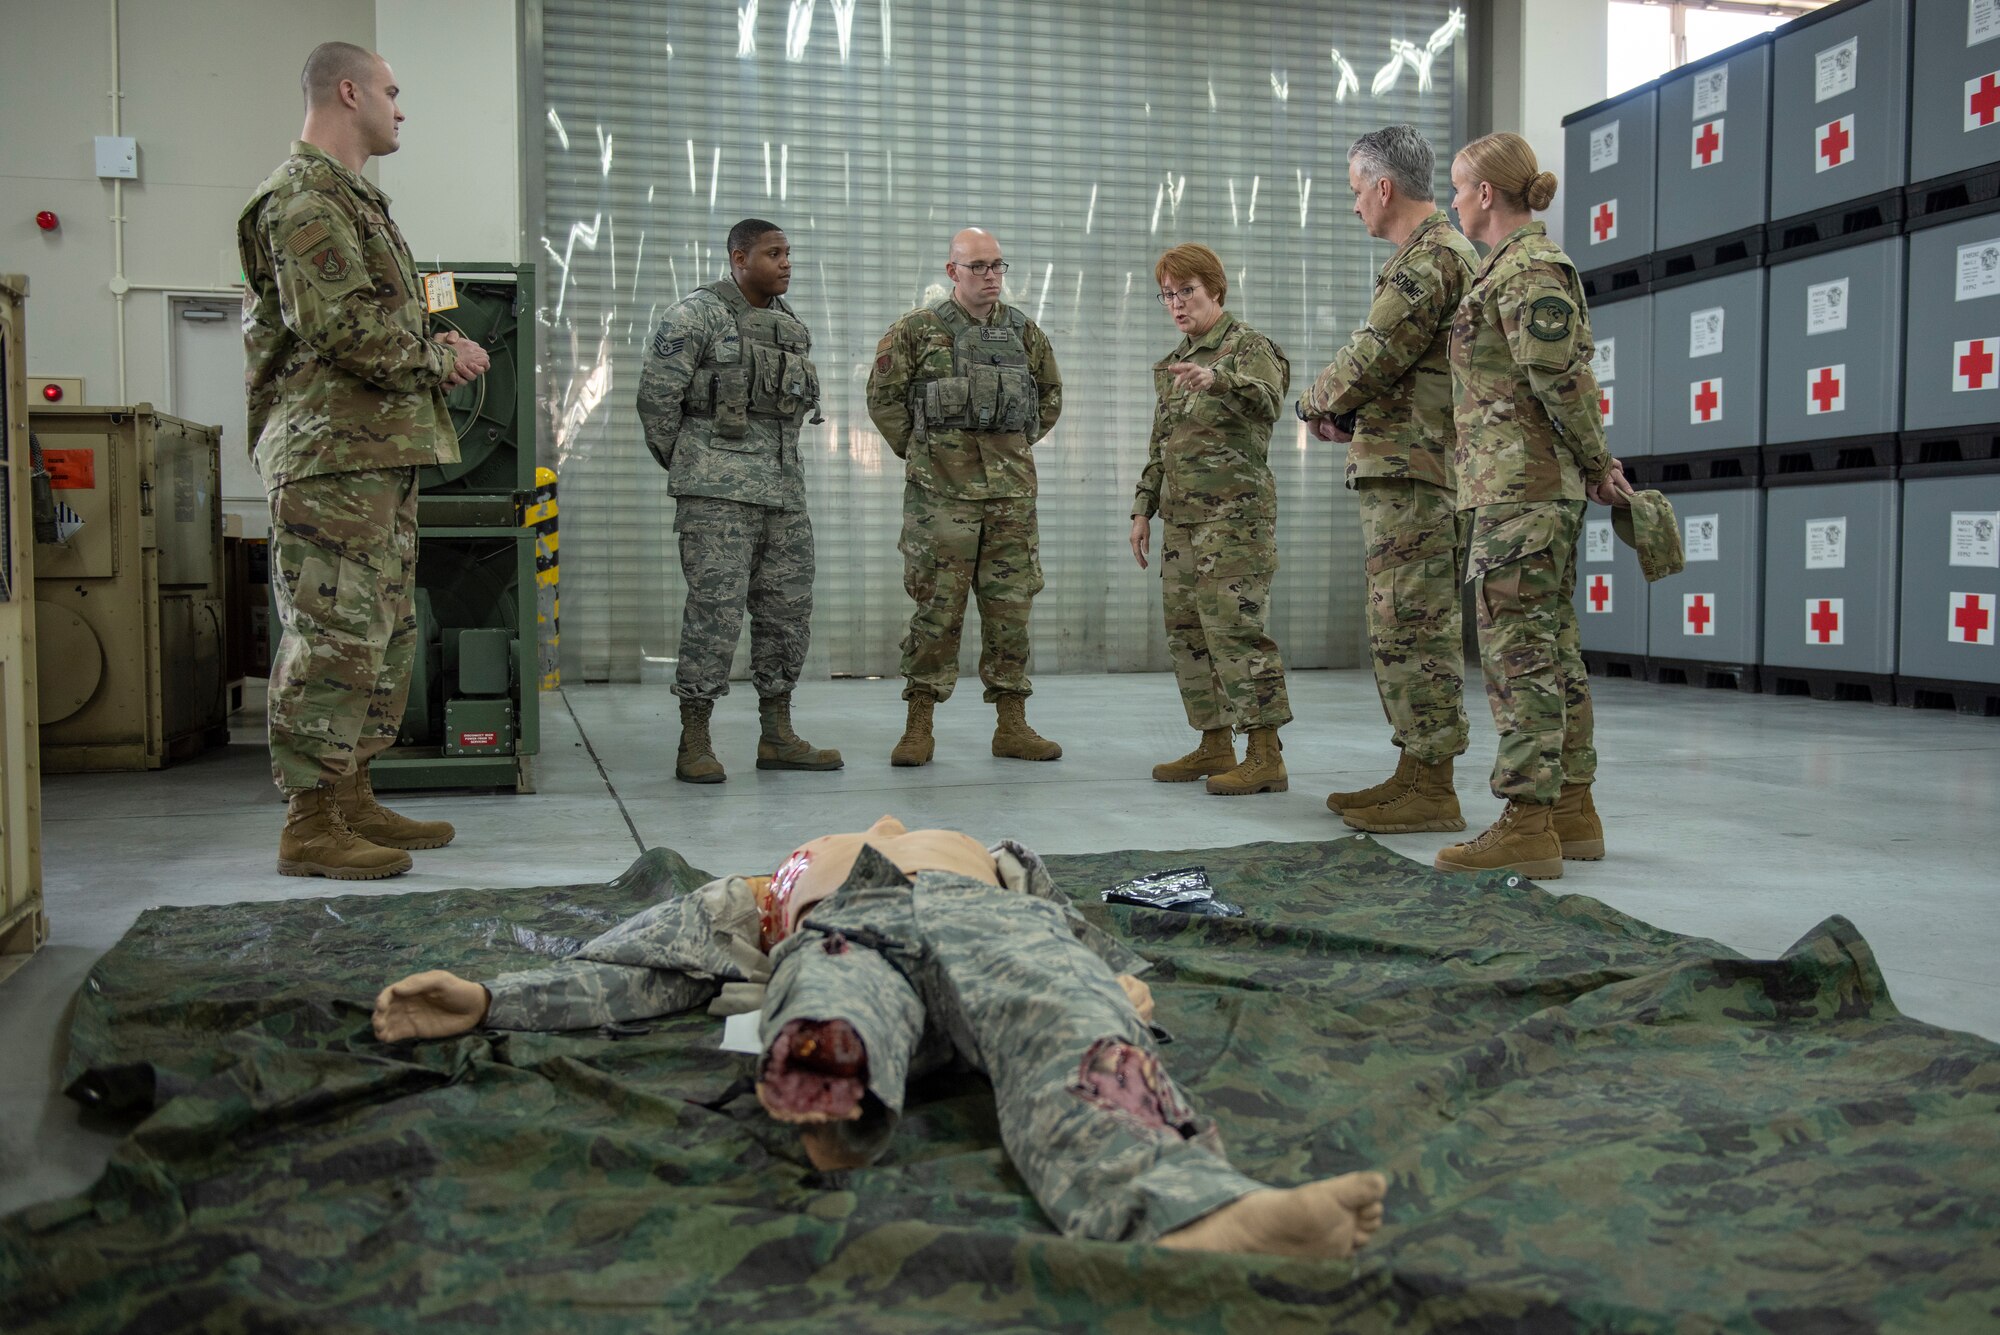 Lt. Gen. Dorothy Hogg, 23rd U.S. Air Force Surgeon General, discusses Tactical Casualty Combat Care (TCCC) training with a pair of 374th Security Forces Squadron defenders after a TCCC demonstration at Yokota Air Base, Japan, Jan. 29, 2019.